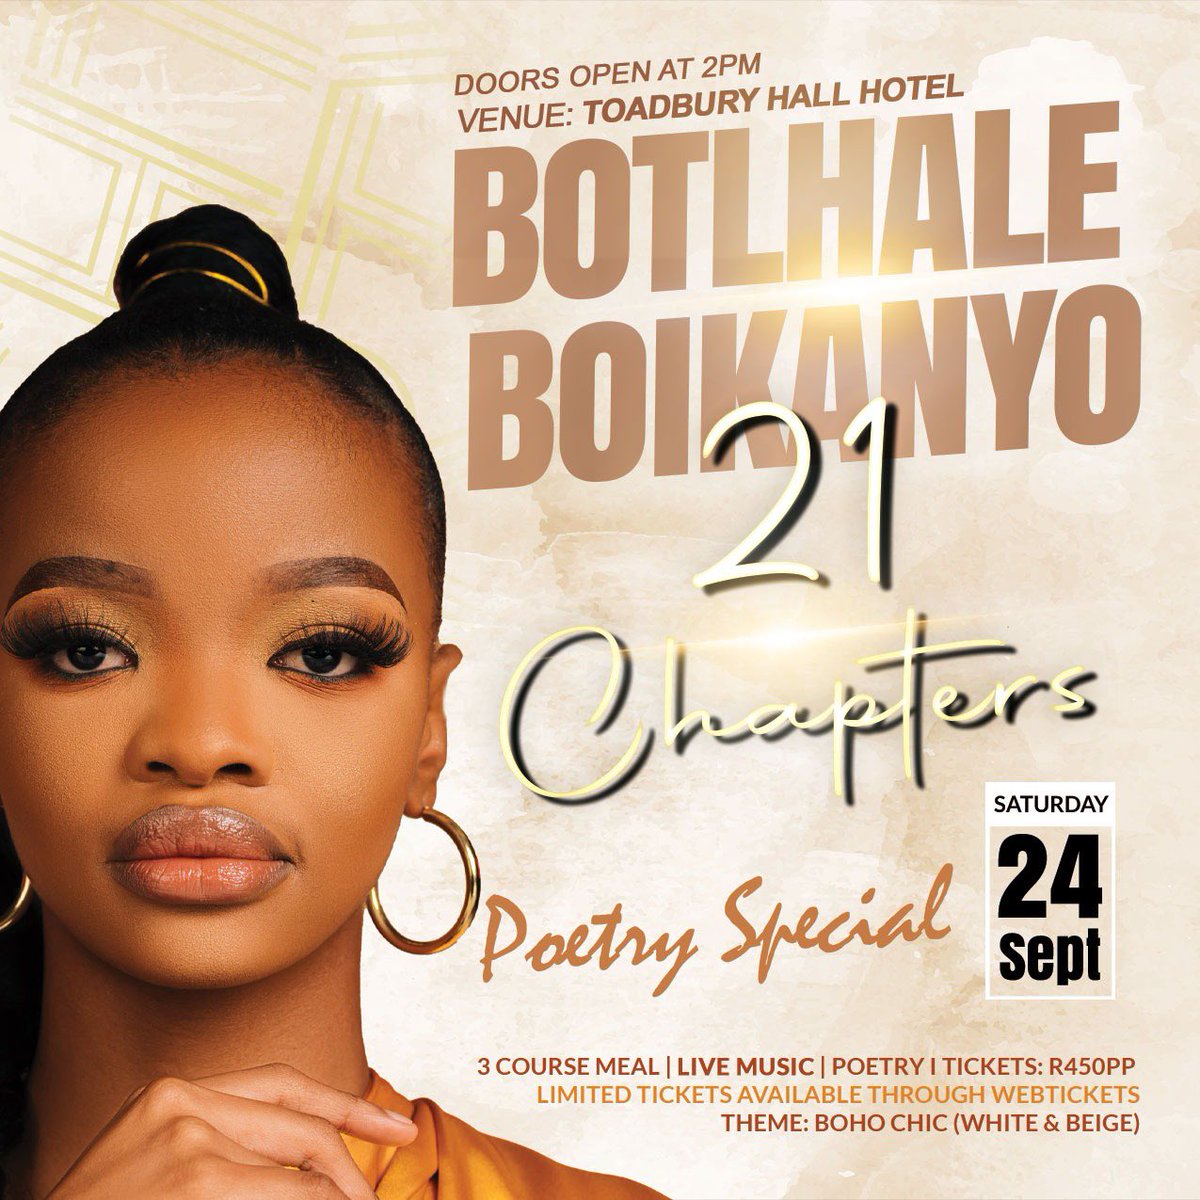 Botlhale Boikanyo : 21 Chapters Poetry Special 

24th of September - it’s a date💃🏾

Limited number of tickets available through Webticket 

Link : webtickets.co.za/event.aspx?ite…

#21Chapters #Poetry